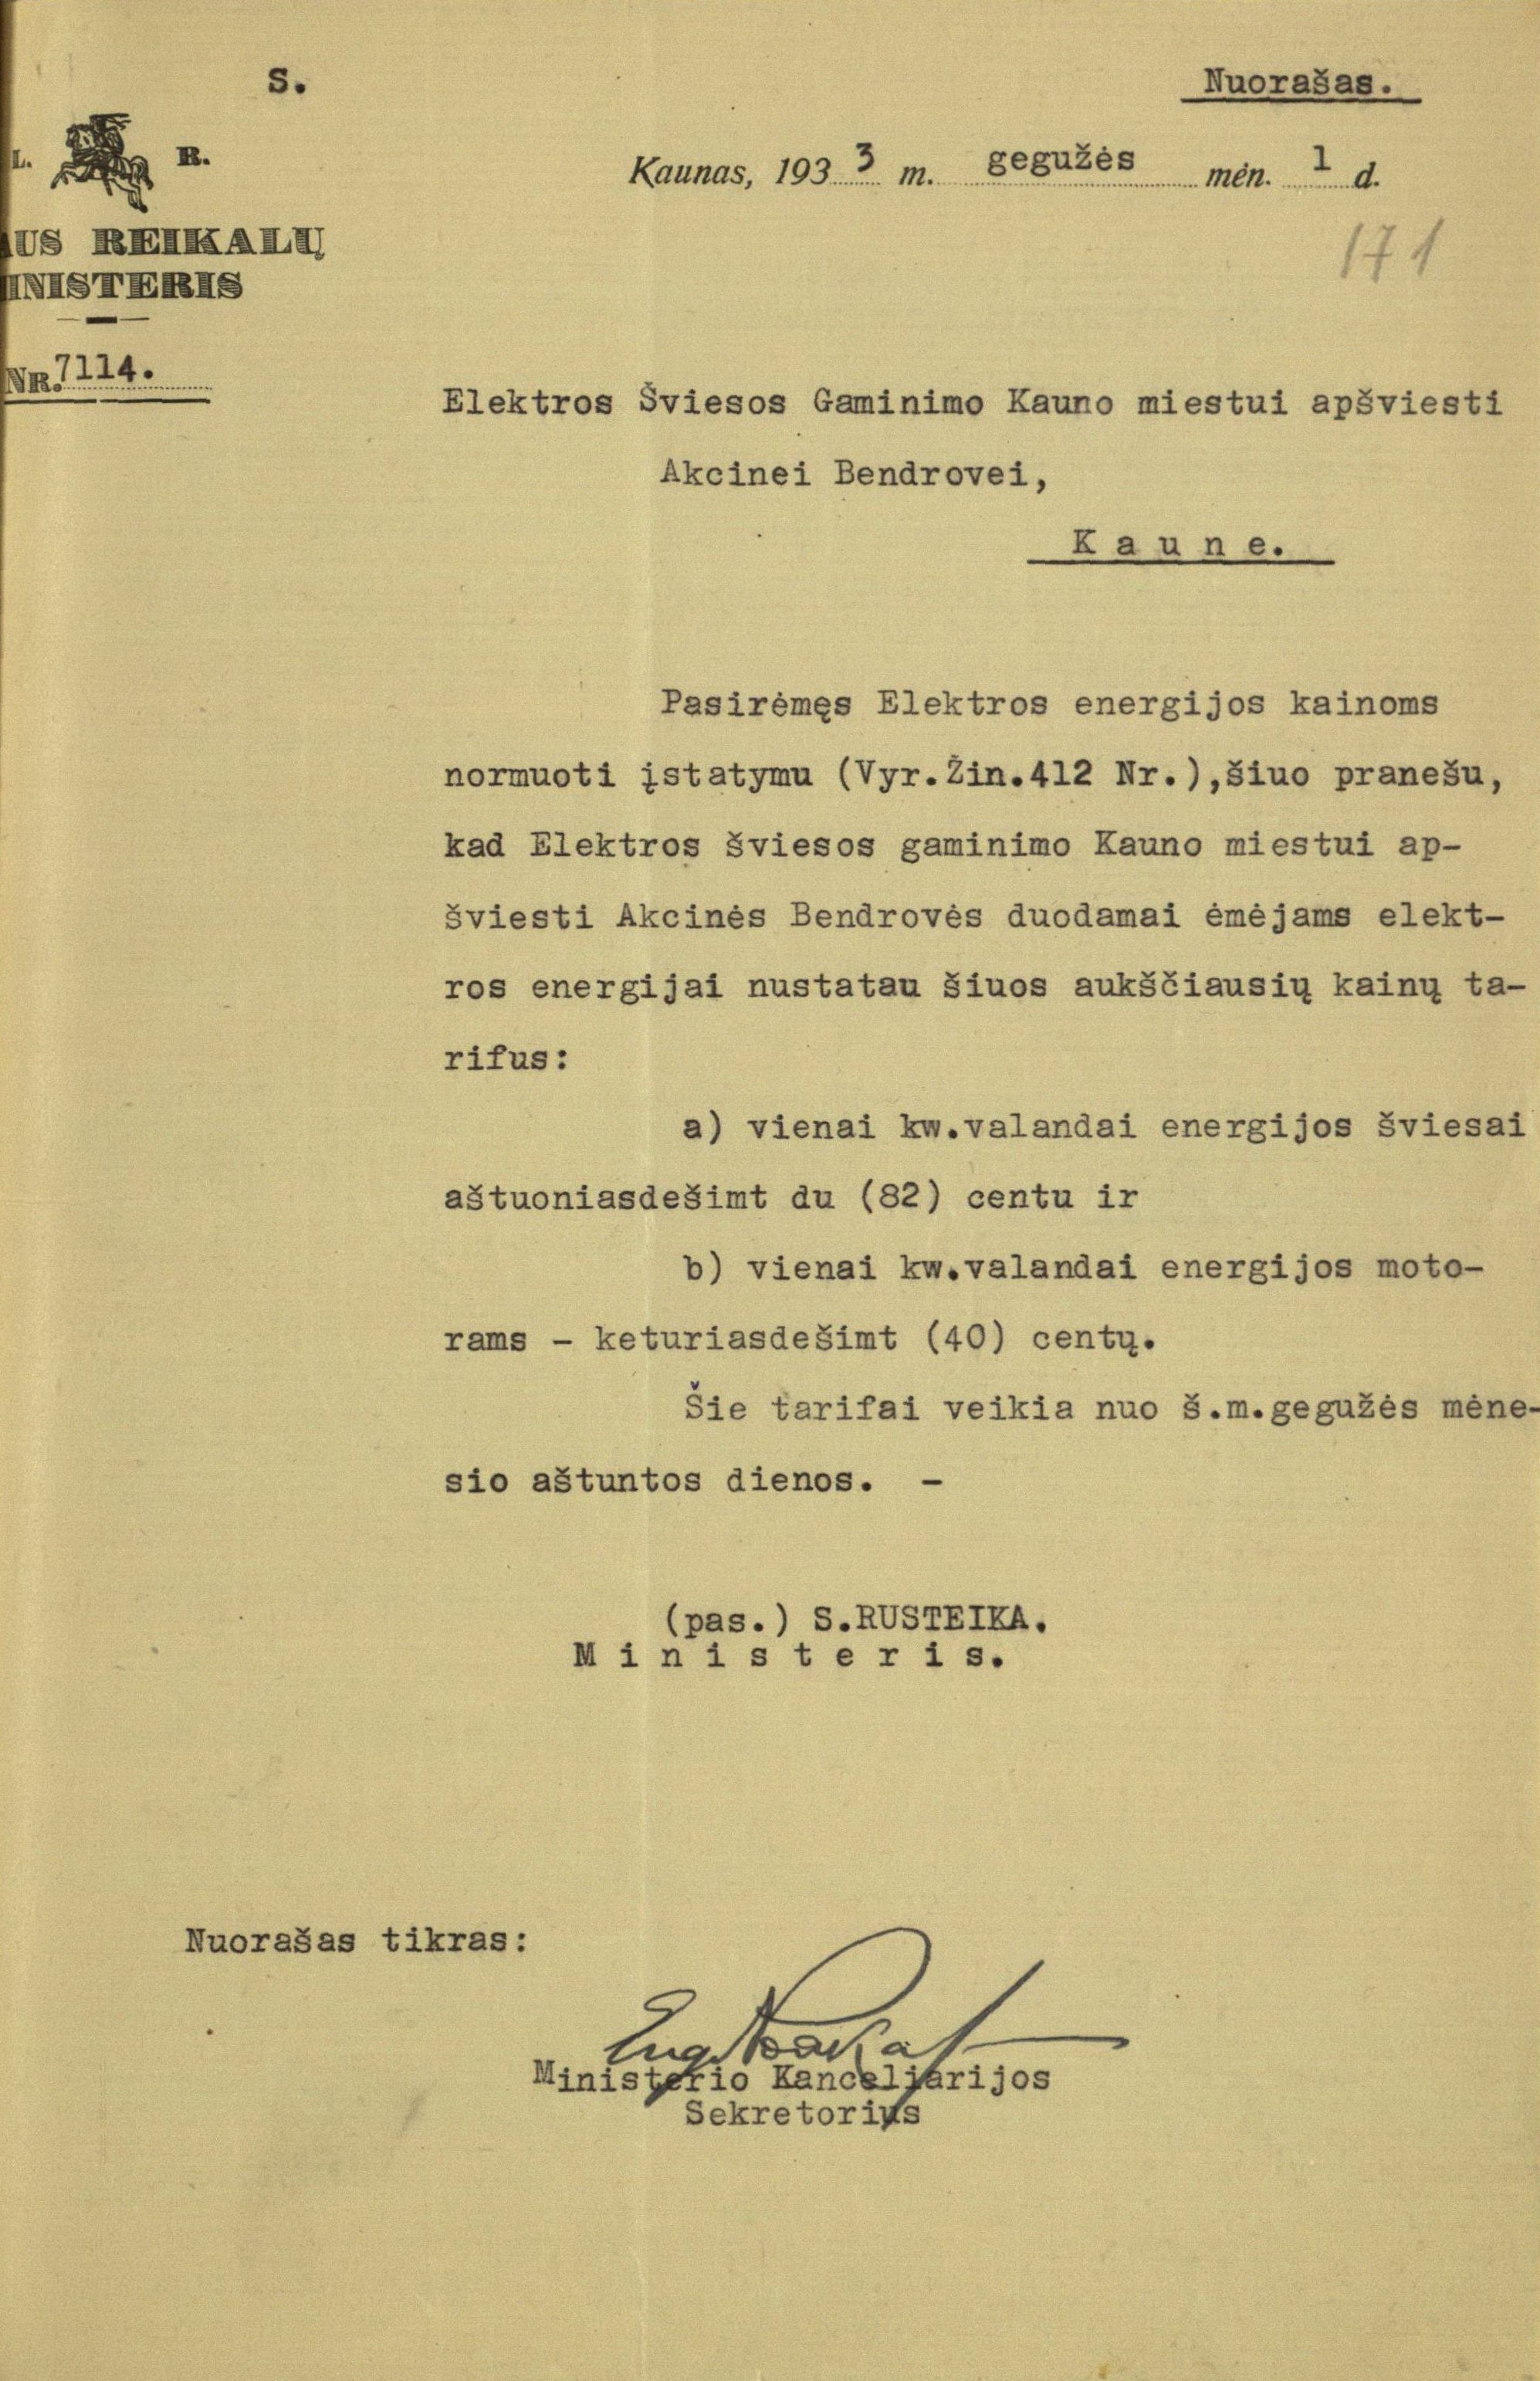 Lithuanian Central State Archives, Lithuanian central State archives, The order of Lithuanian minister of interior setting electricity prices (1933)
